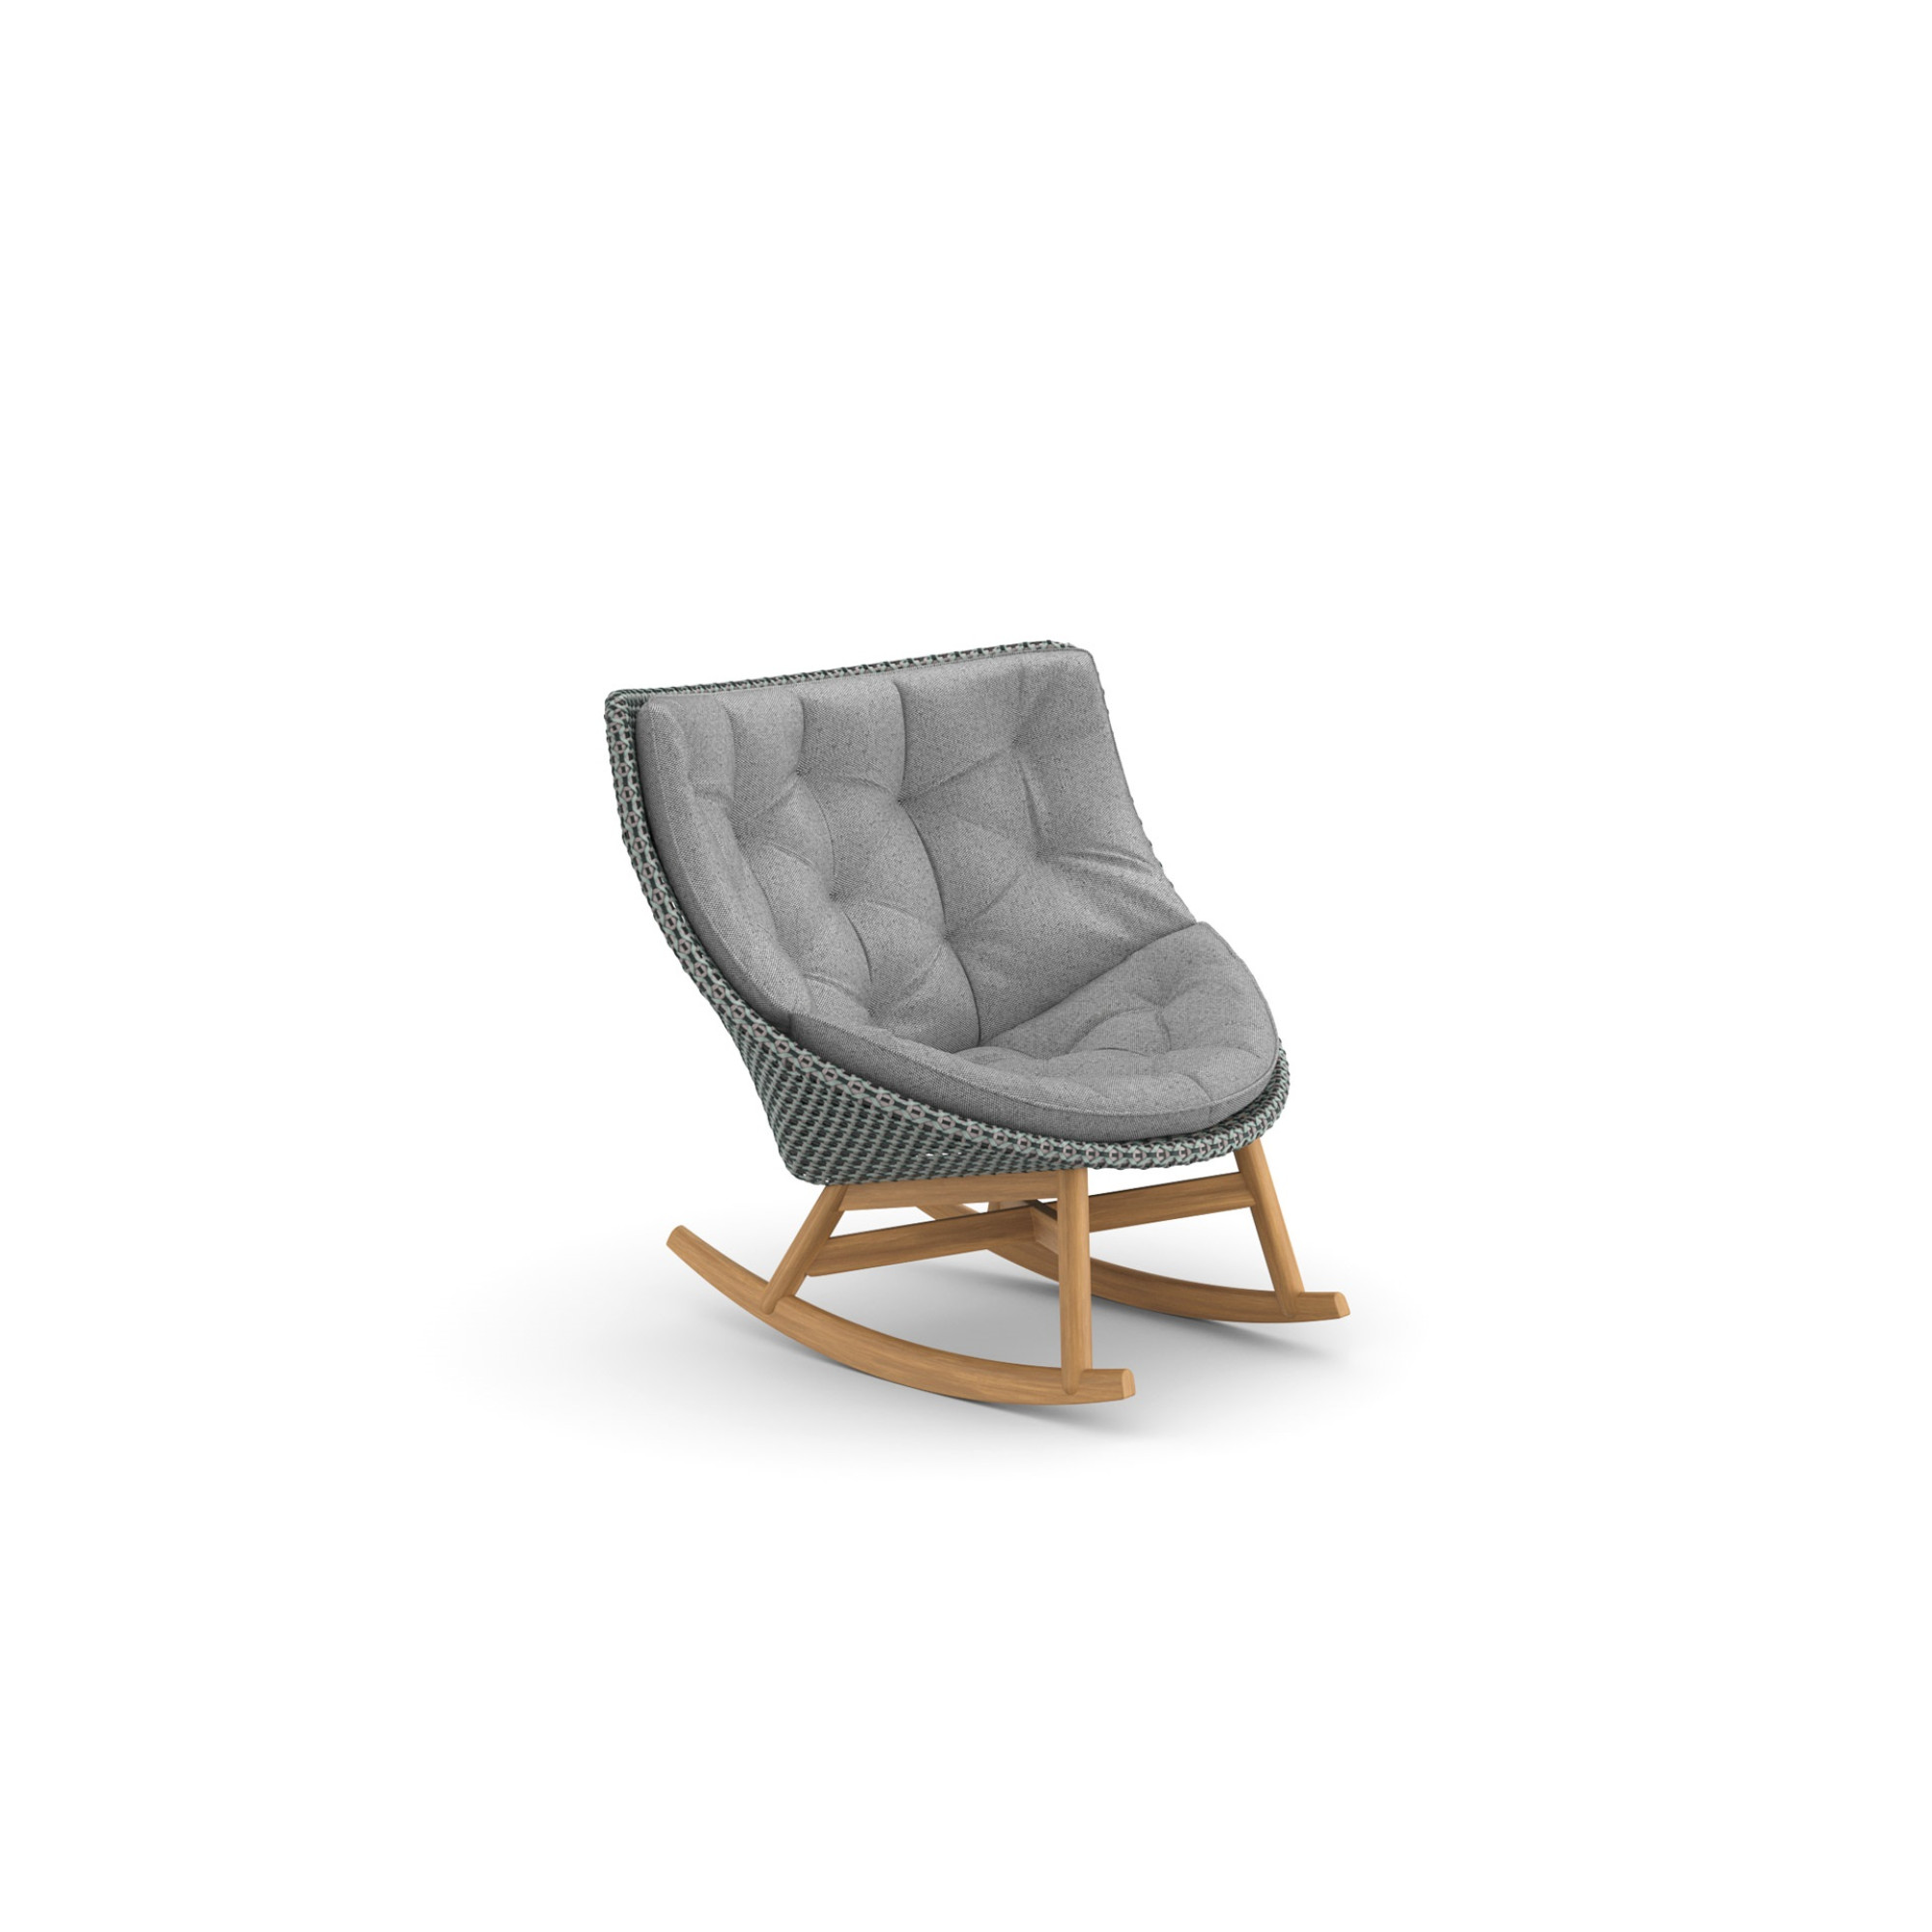 MBRACE ROCKING CHAIR, by DEDON